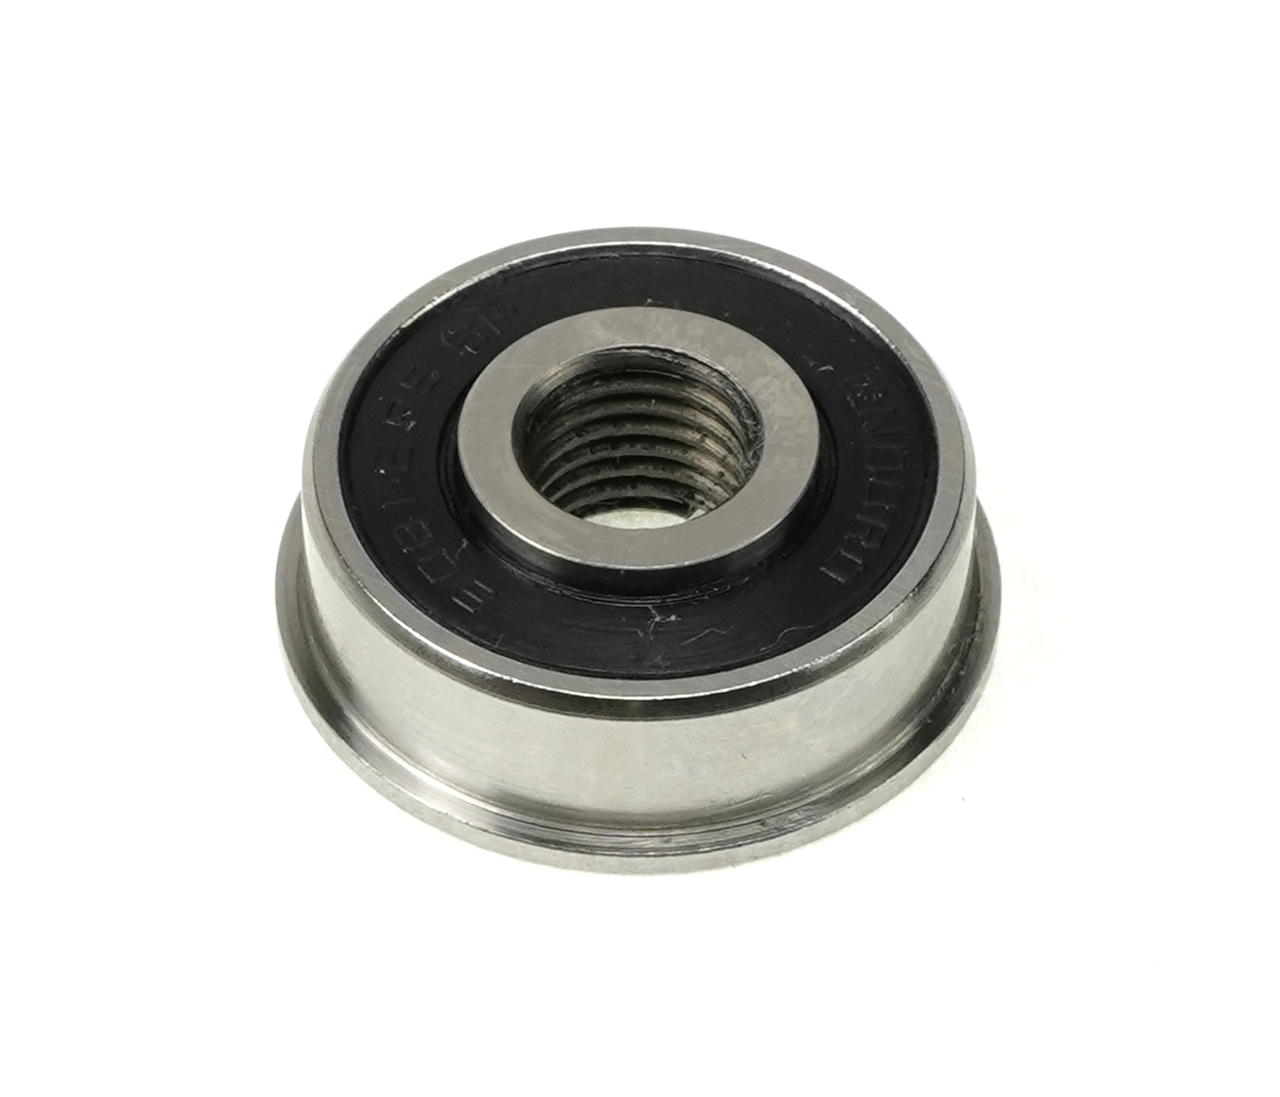 Enduro 608 FE 2RS SP- ABEC-3, Flanged, Threaded-Extended Inner Race, Radial Bearing (C3 Clearance) - 8mm x 22/24mm x 8/7mm